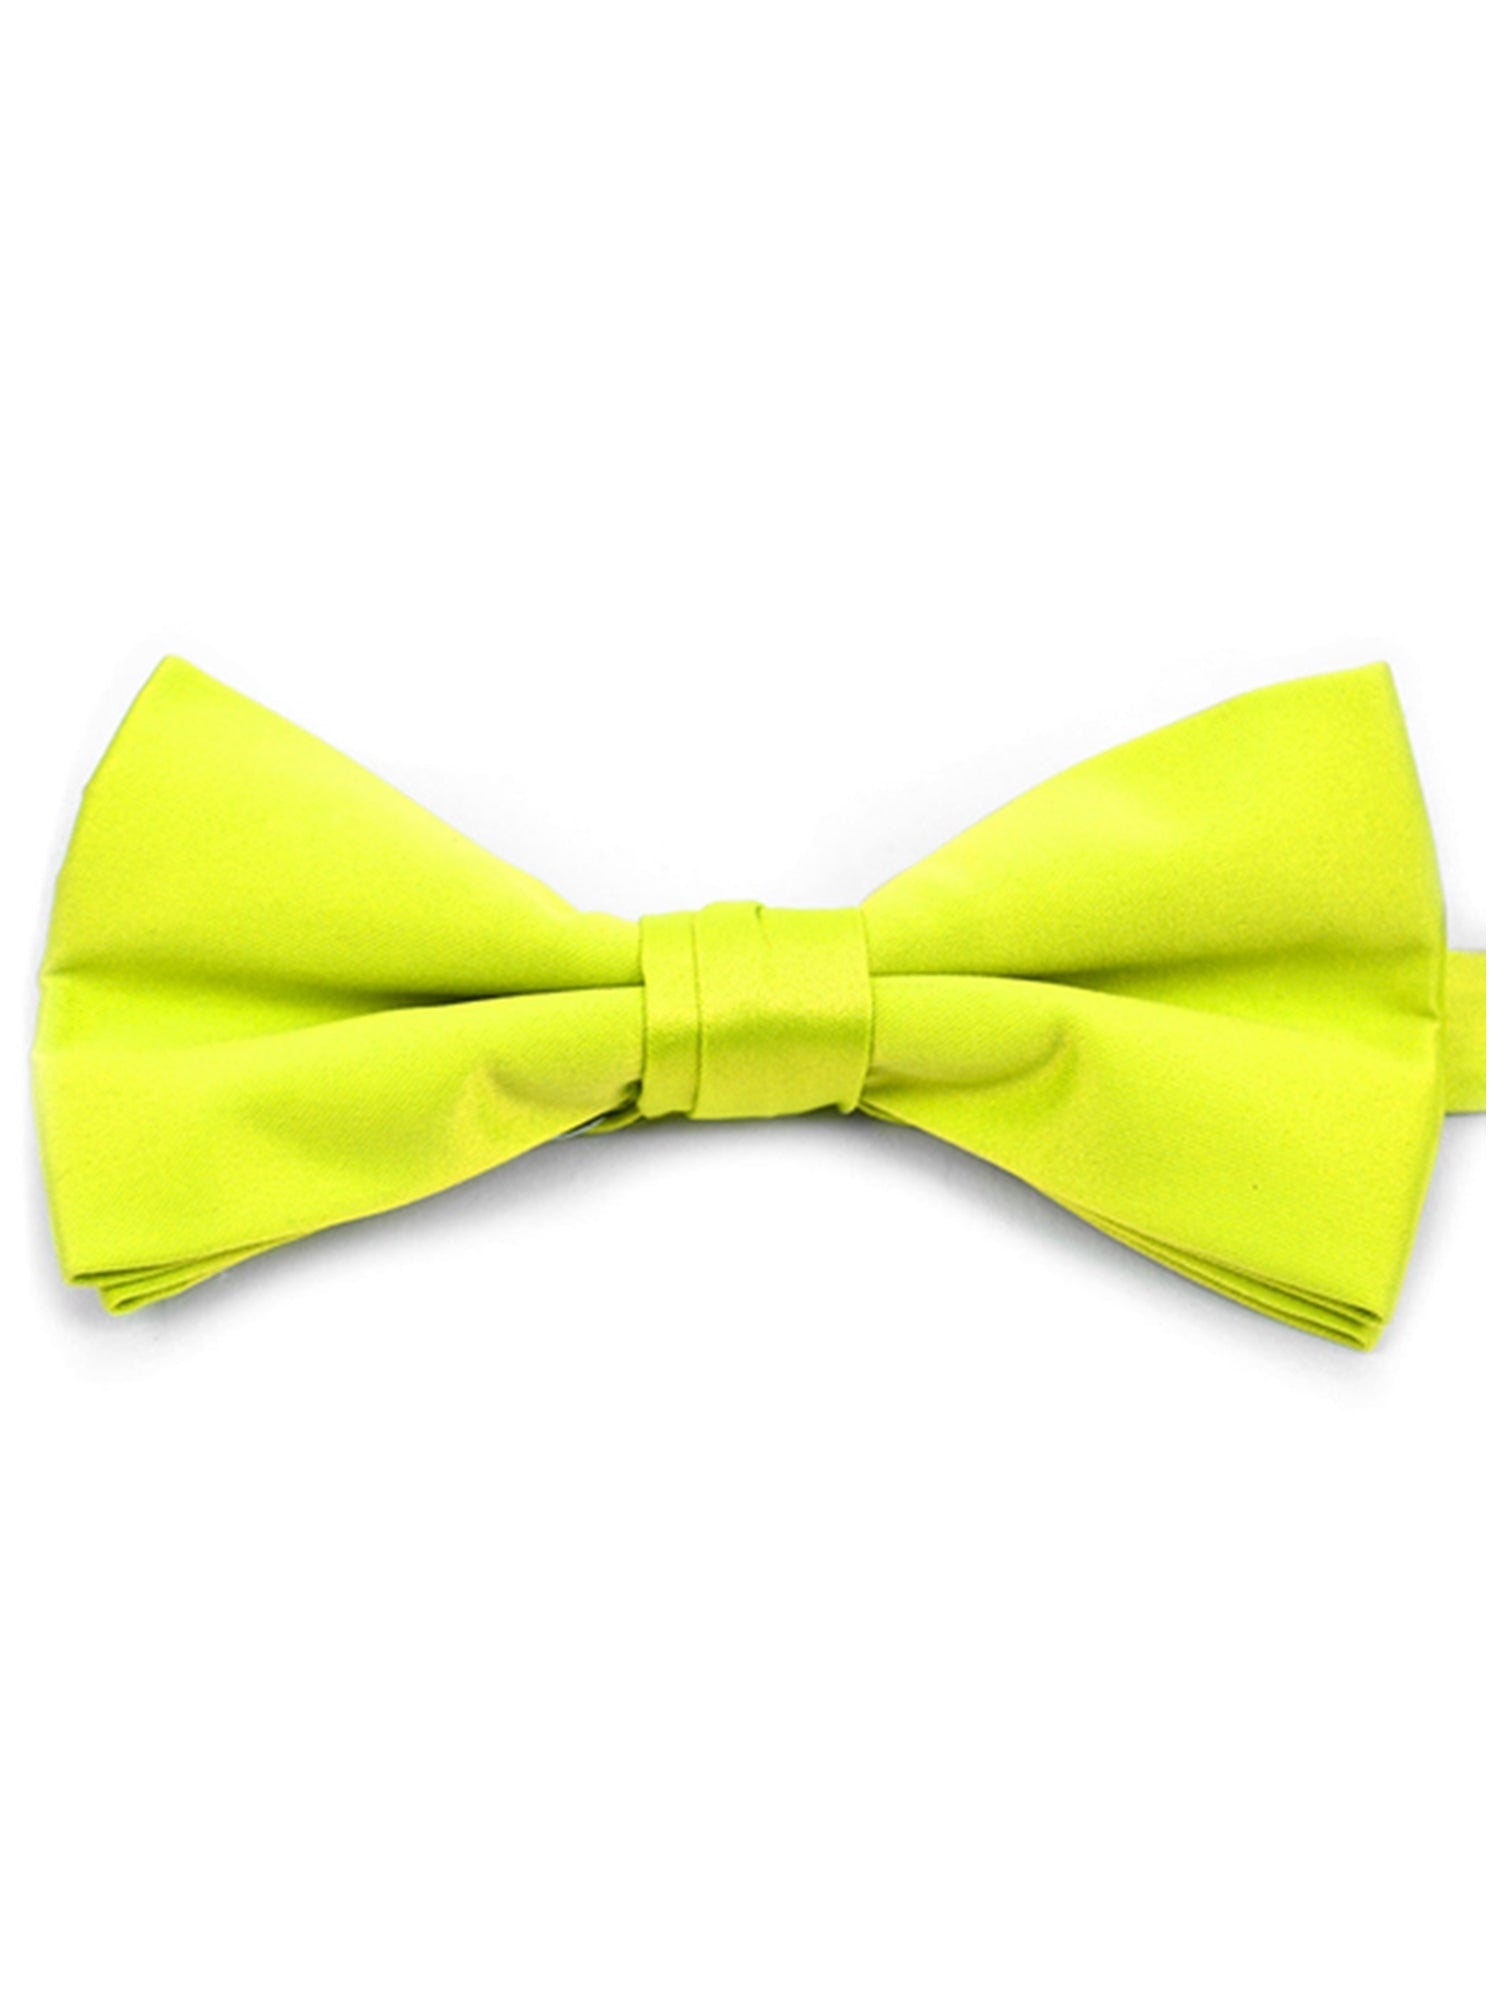 Young Boy's Pre-tied Adjustable Length Bow Tie - Formal Tuxedo Solid Color Boy's Solid Color Bow Tie TheDapperTie Neon Yellow One Size 